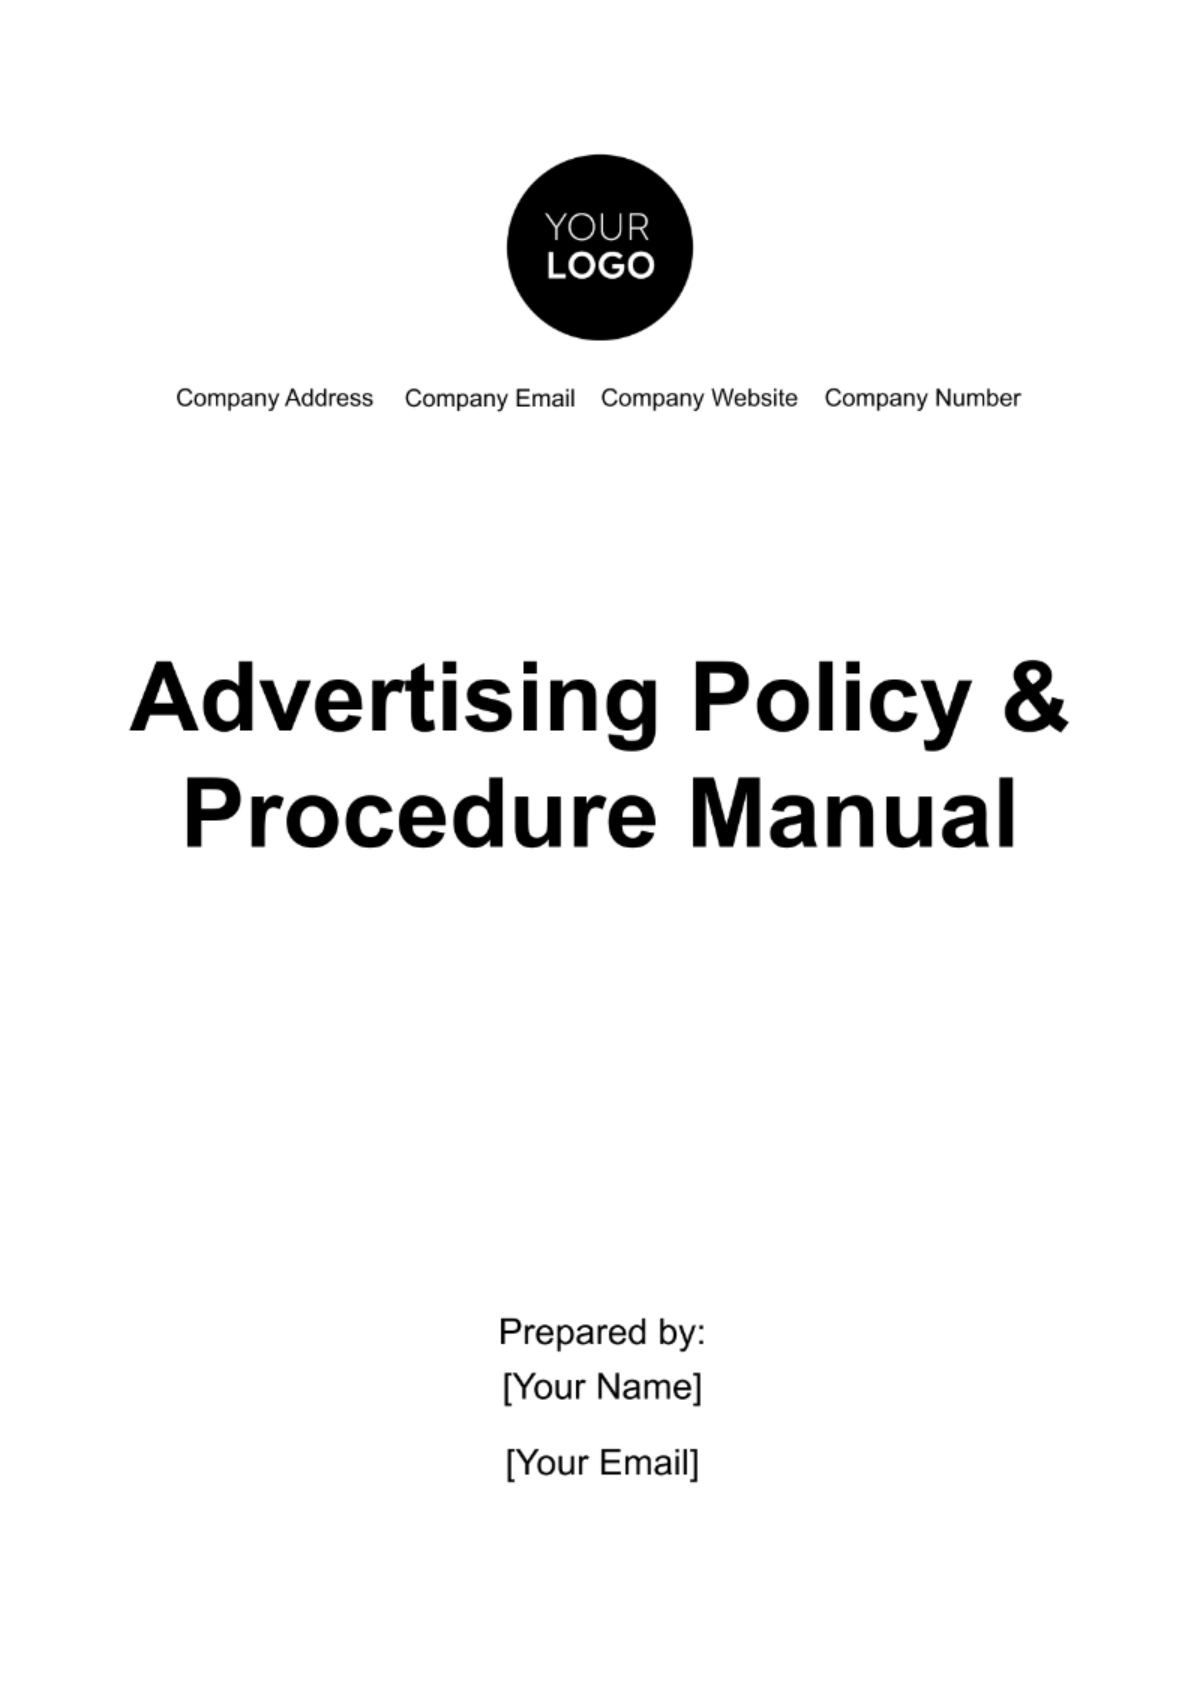 Advertising Policy & Procedure Manual Template